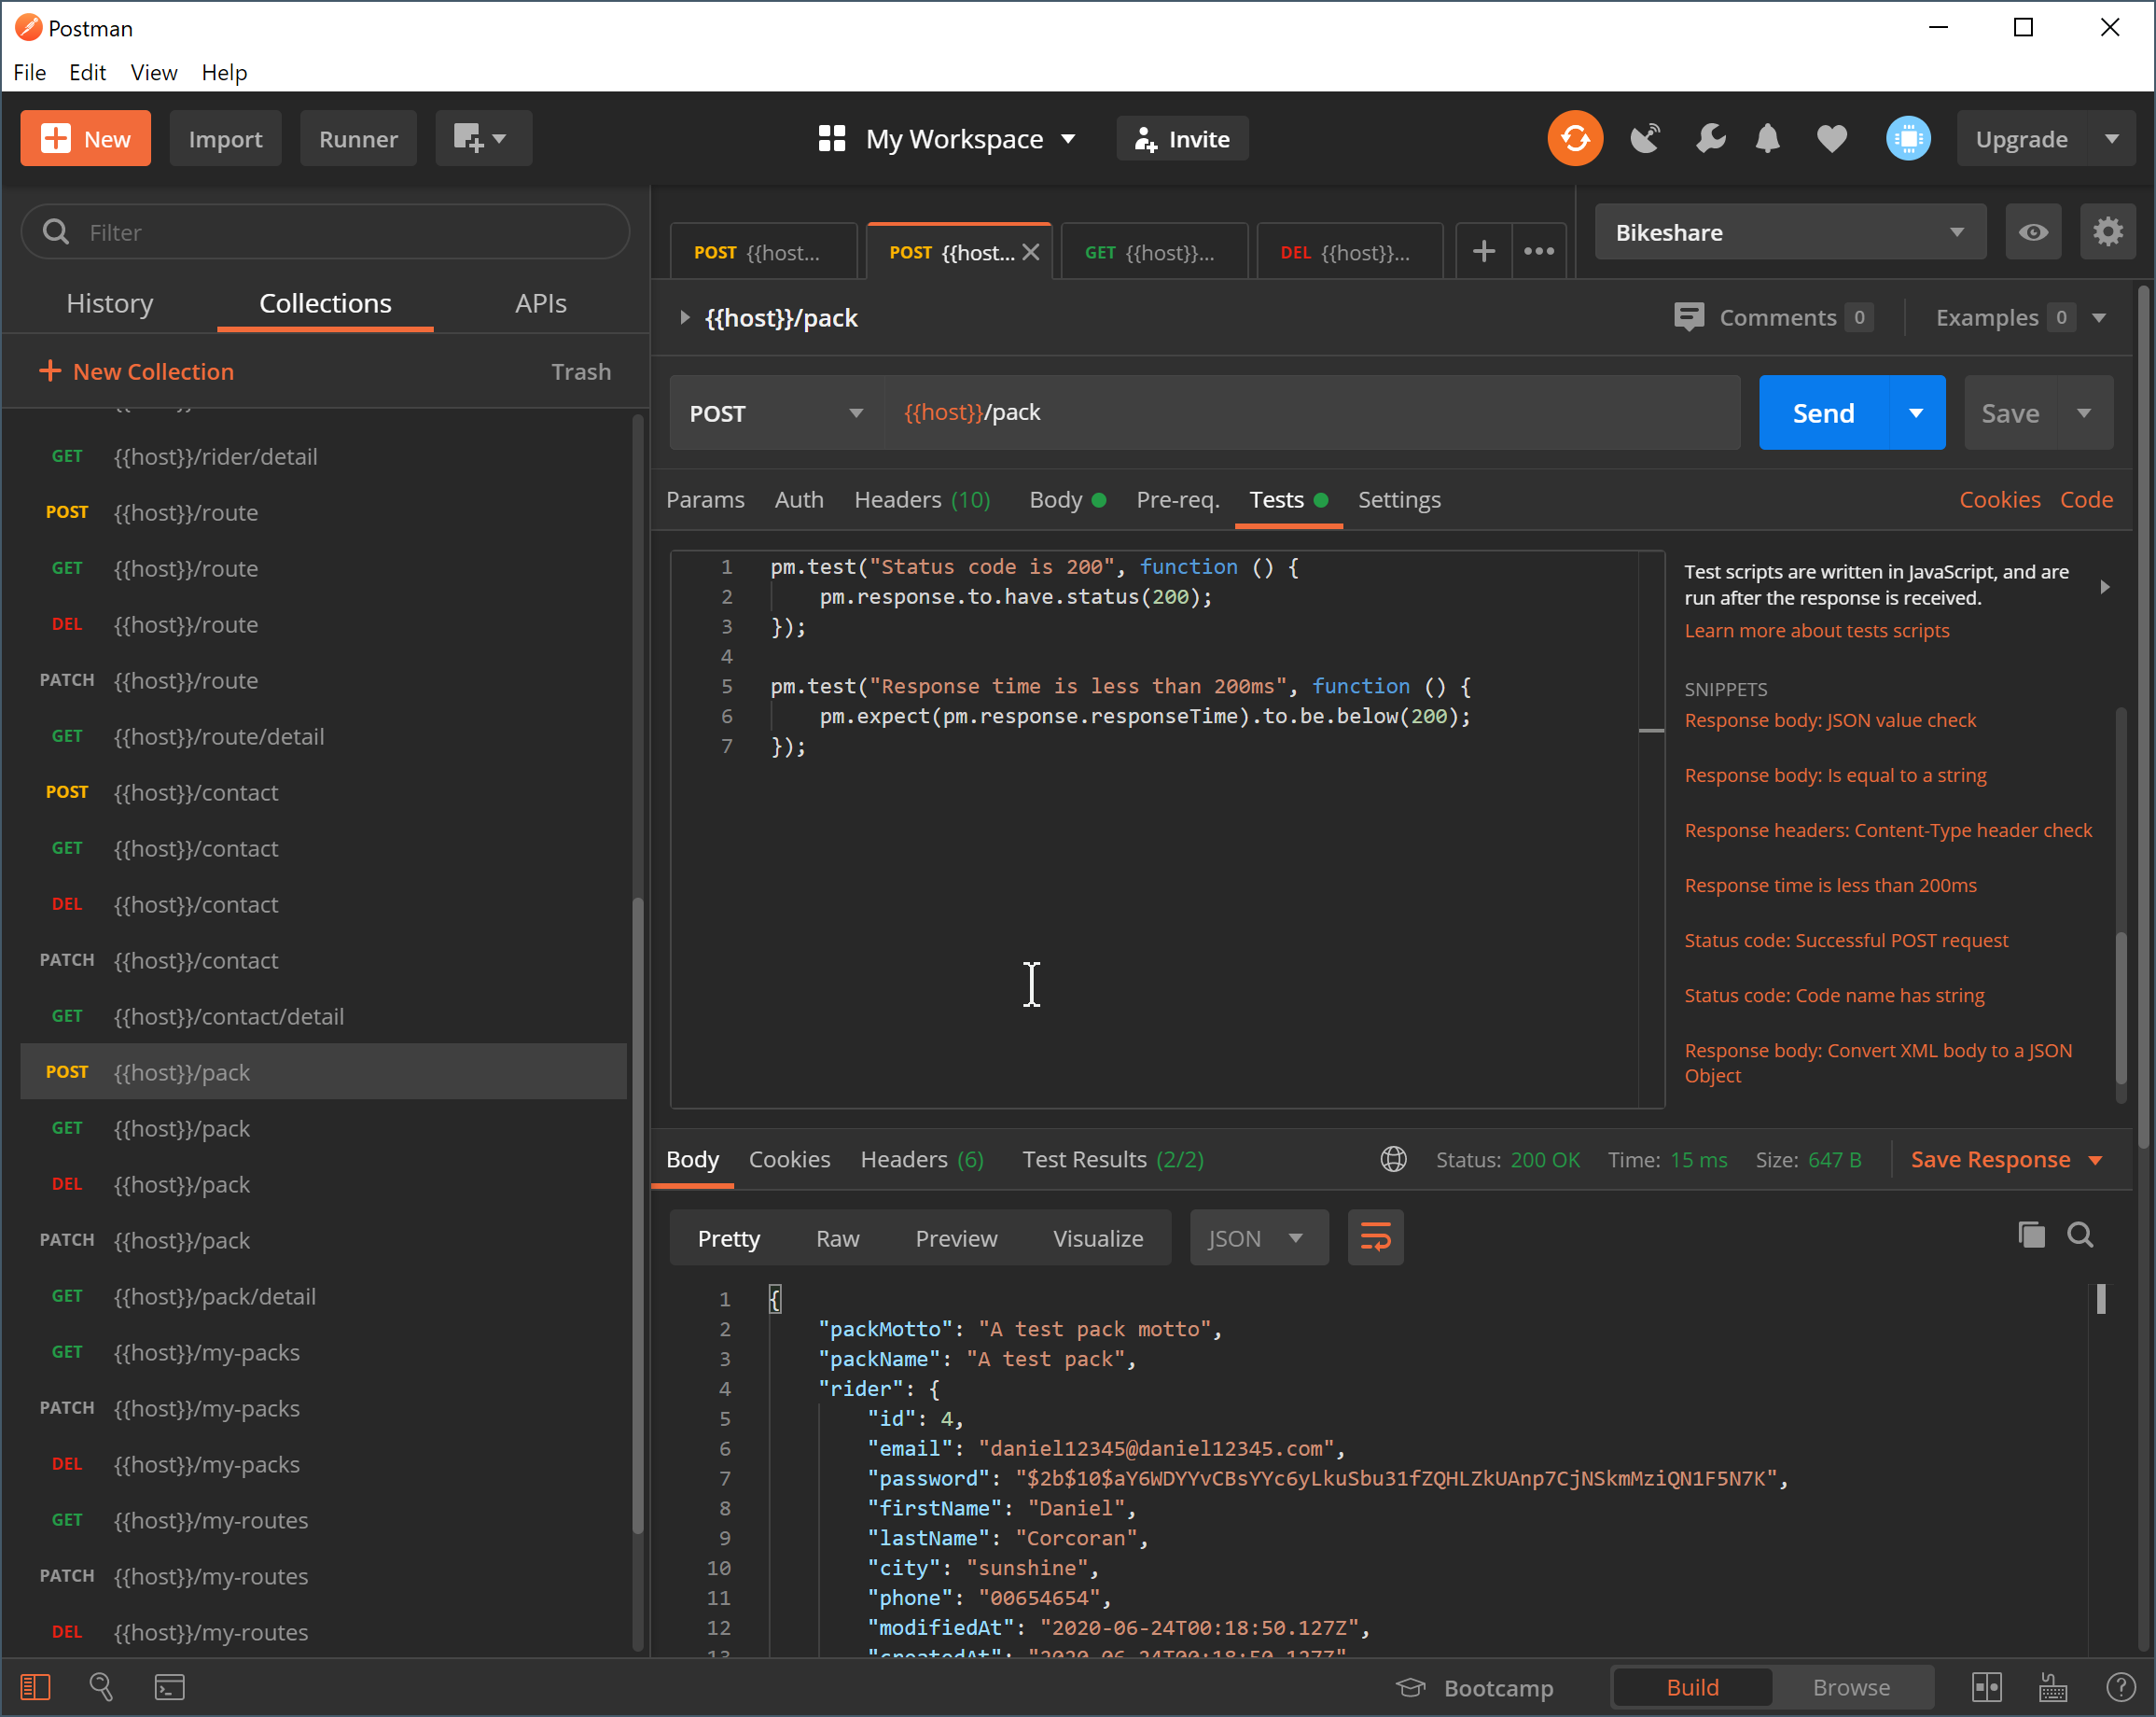 This post will go over how I set up an integration/unit test runner in Postman. The API I will be using is one I made personally and represents a syst